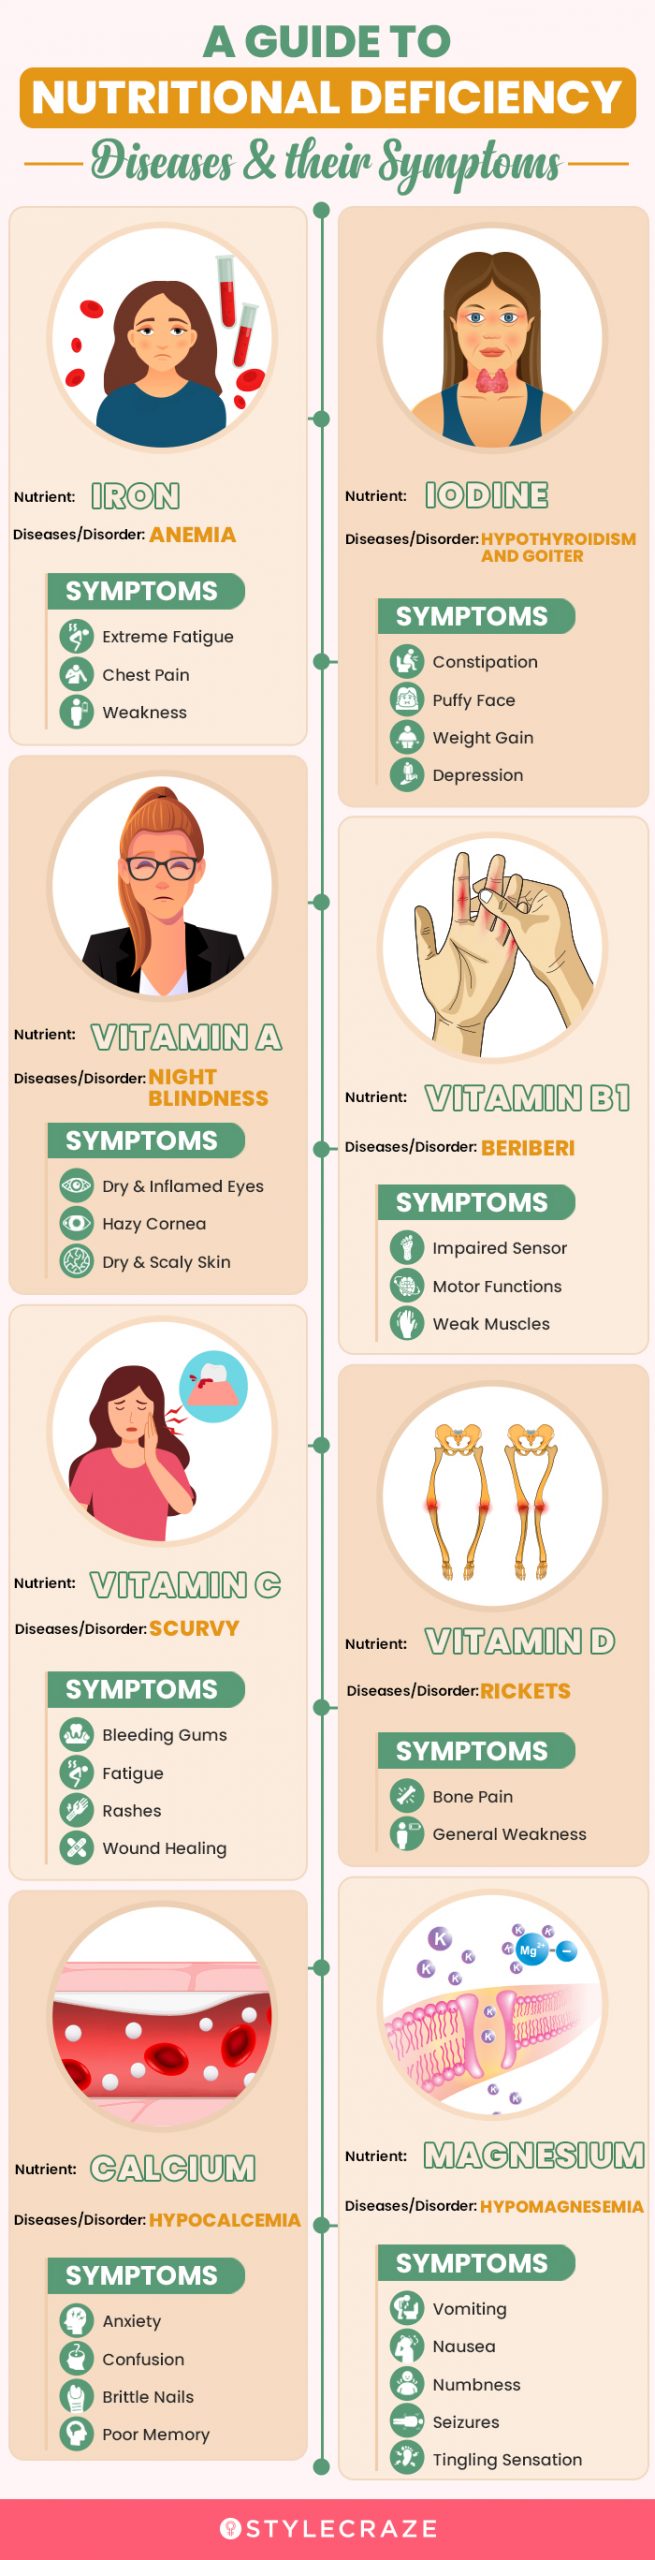 nutritional deficiency diseases [infographic]